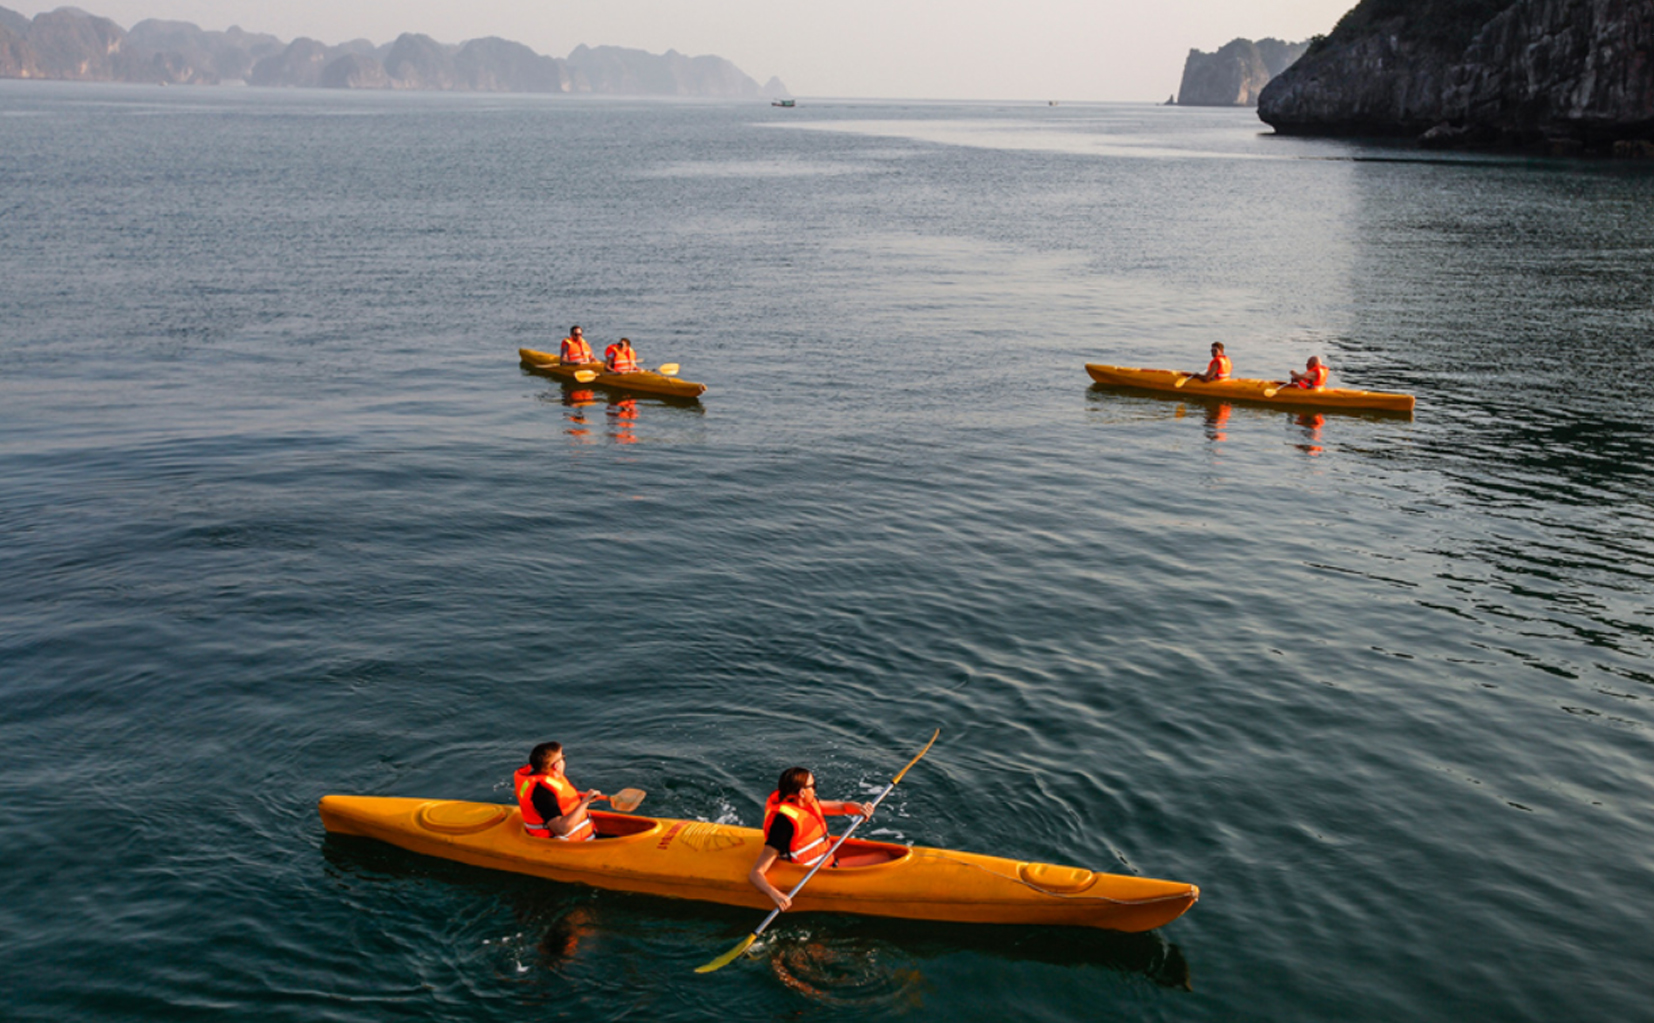 HA LONG BAY - 2 days and 1 night with Era cruise (5 star cruise – Boat with 20 cabins )